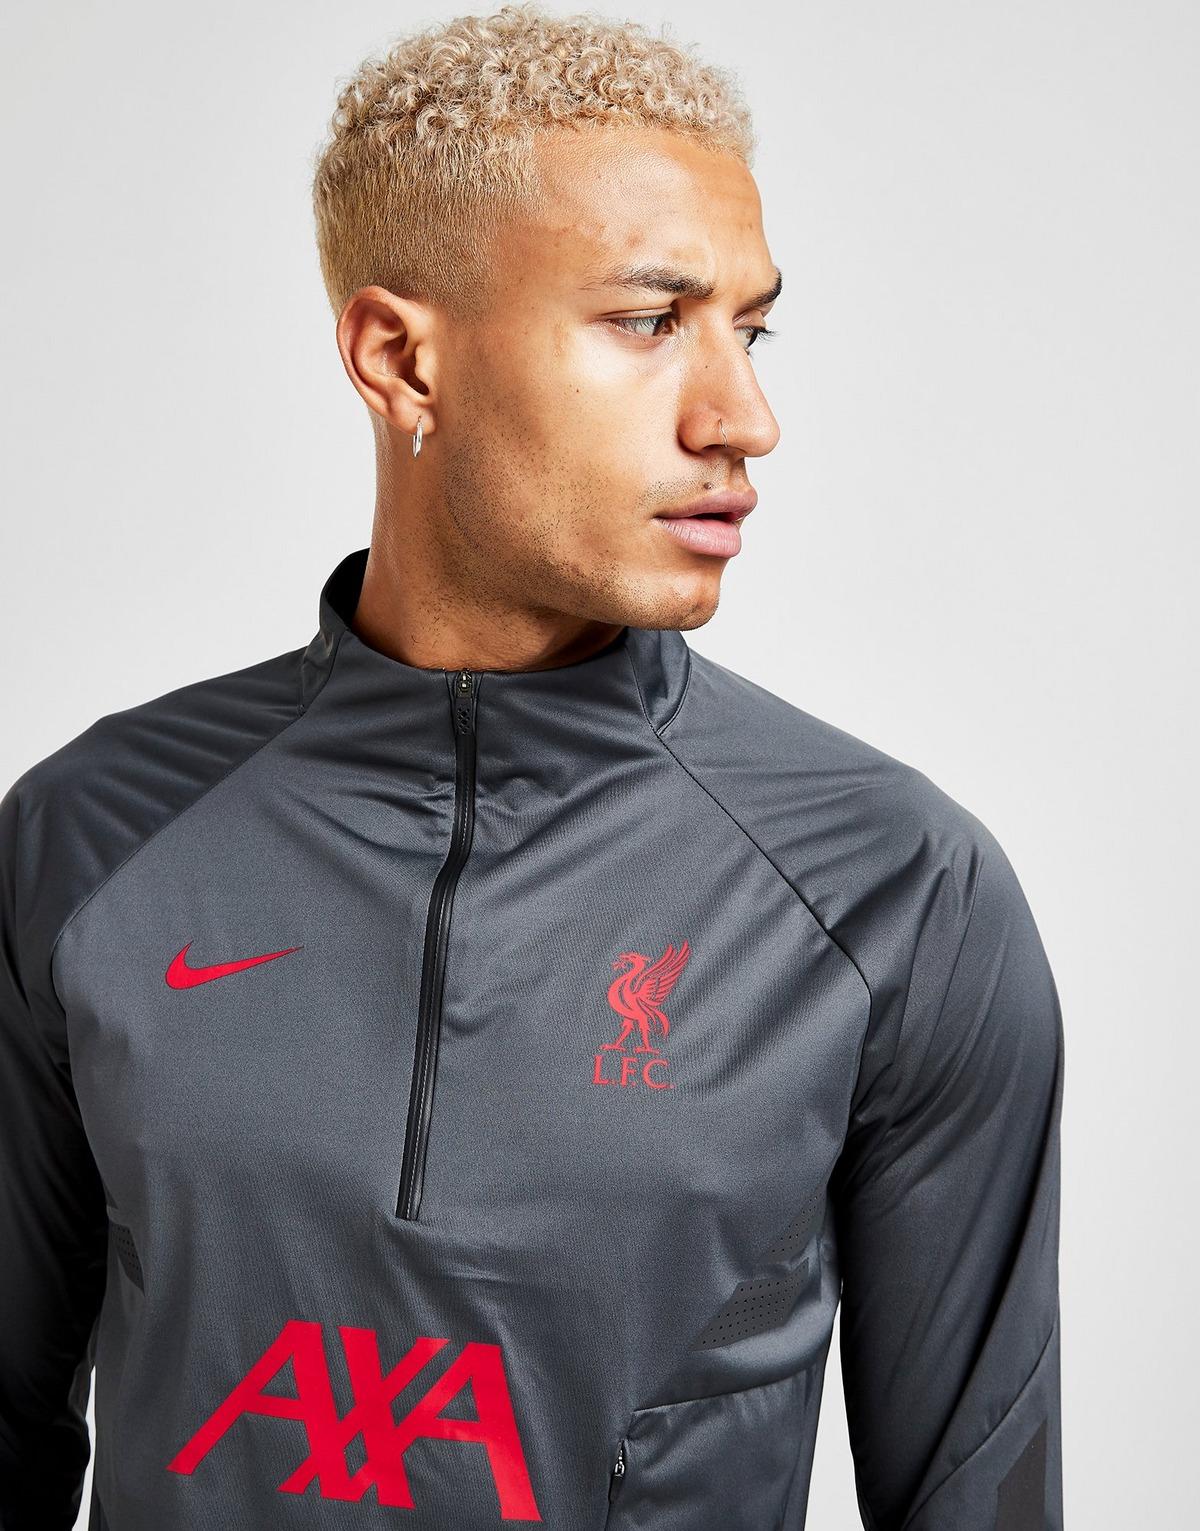 Buy > nike liverpool drill top > in stock